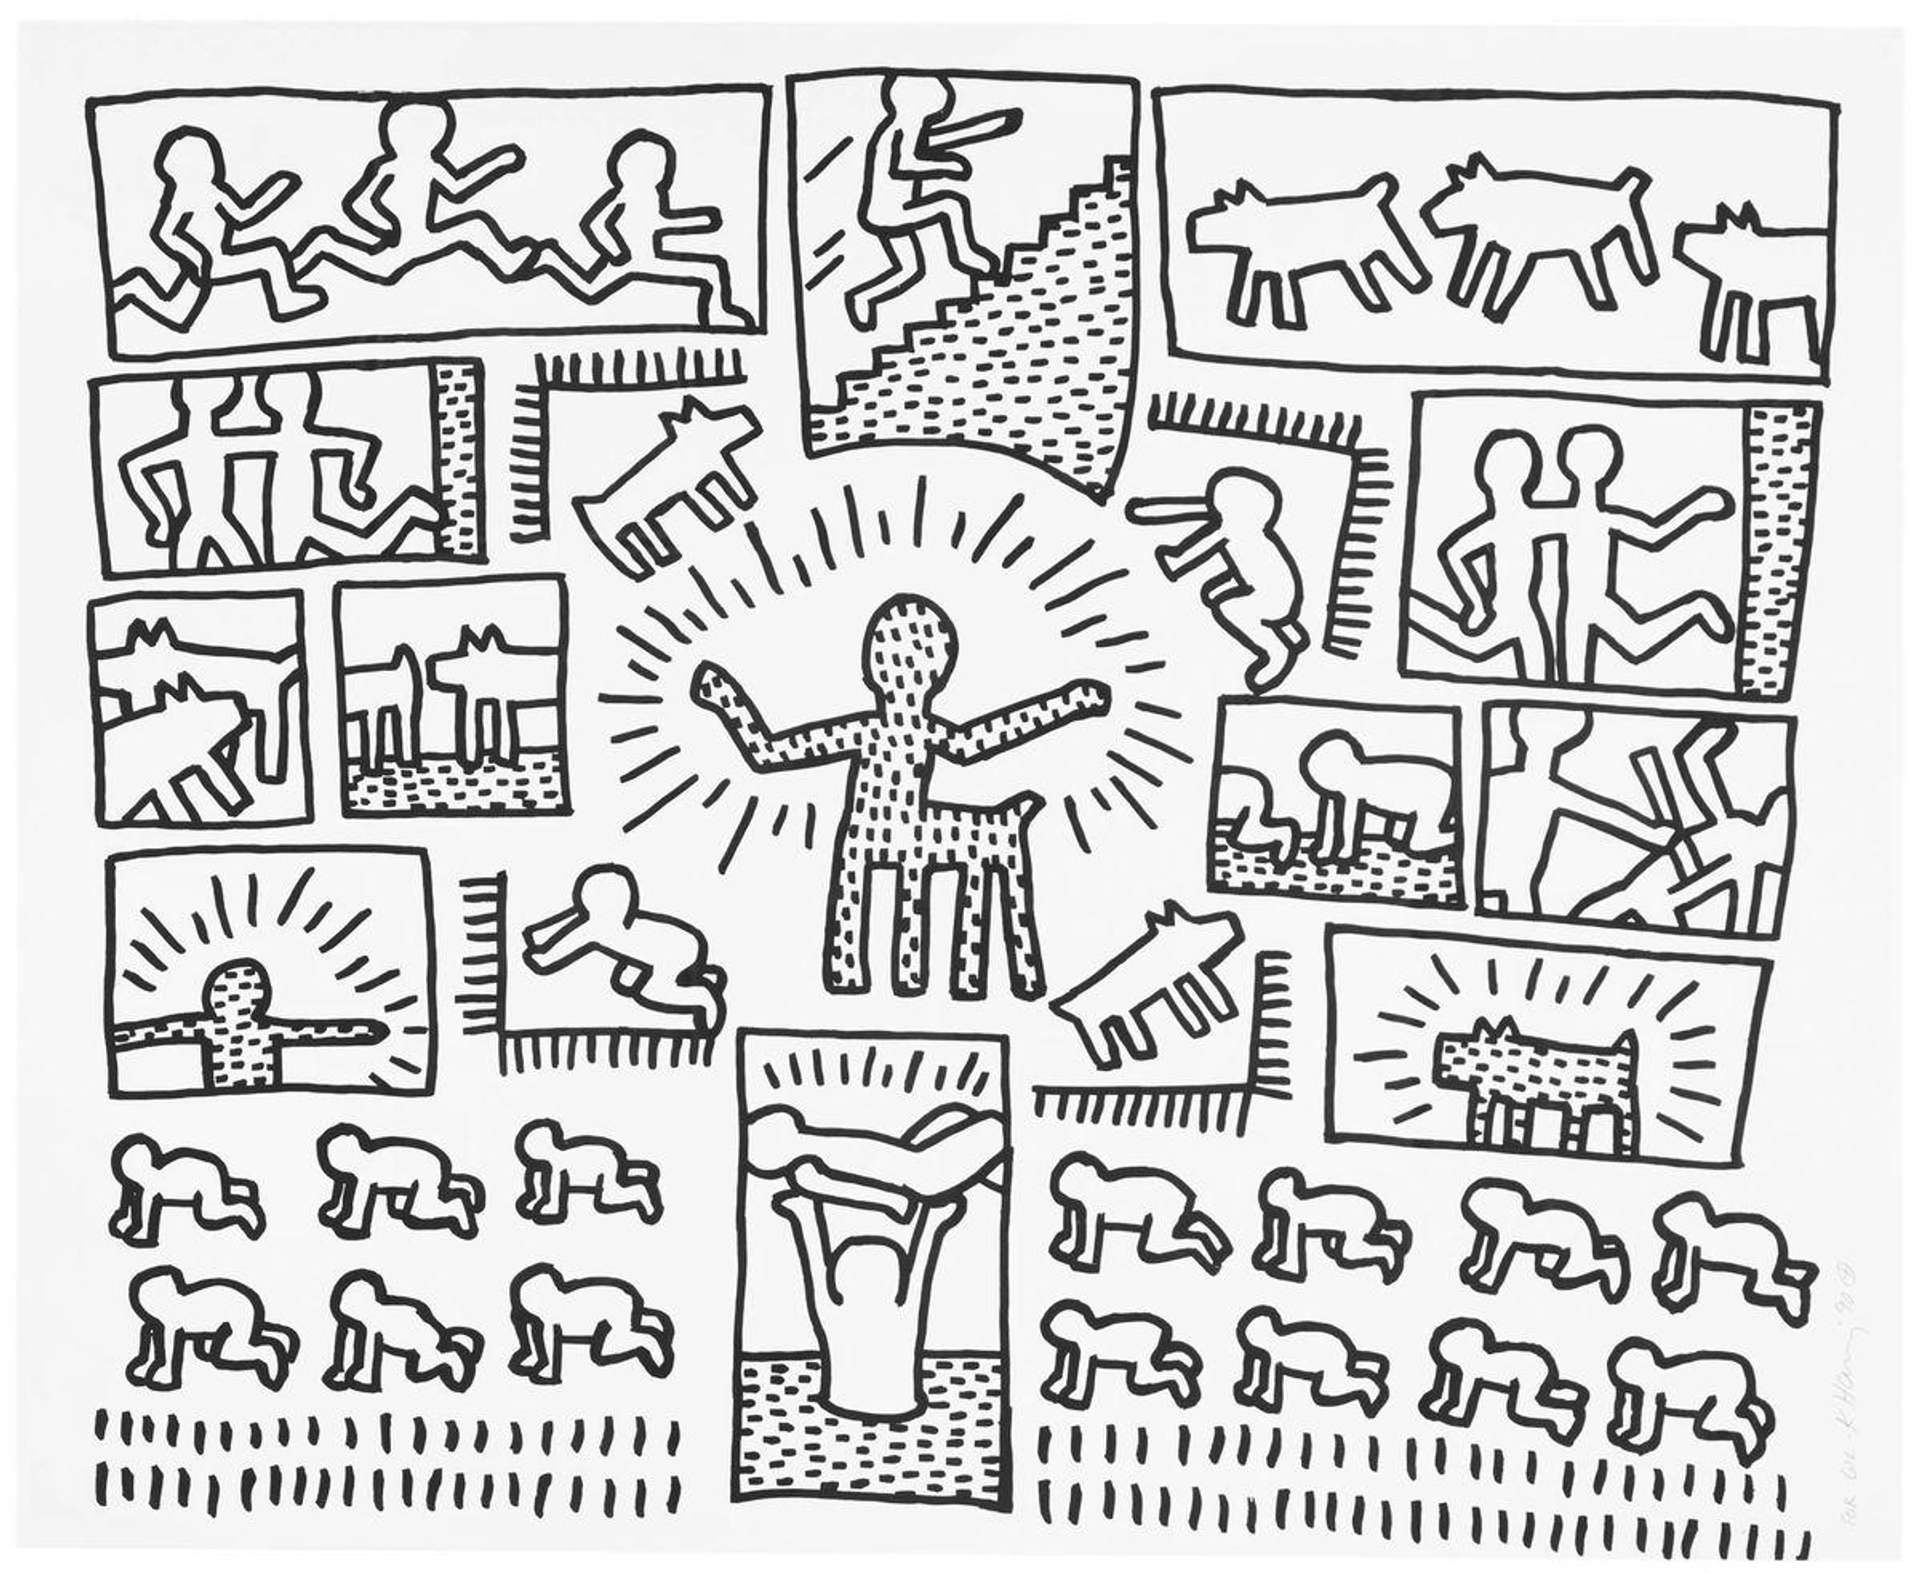 Keith Haring’s The Blueprint Drawings 10. A Pop Art screenprint of a black and white comic strip of various scenes including figures sinking in the floor.